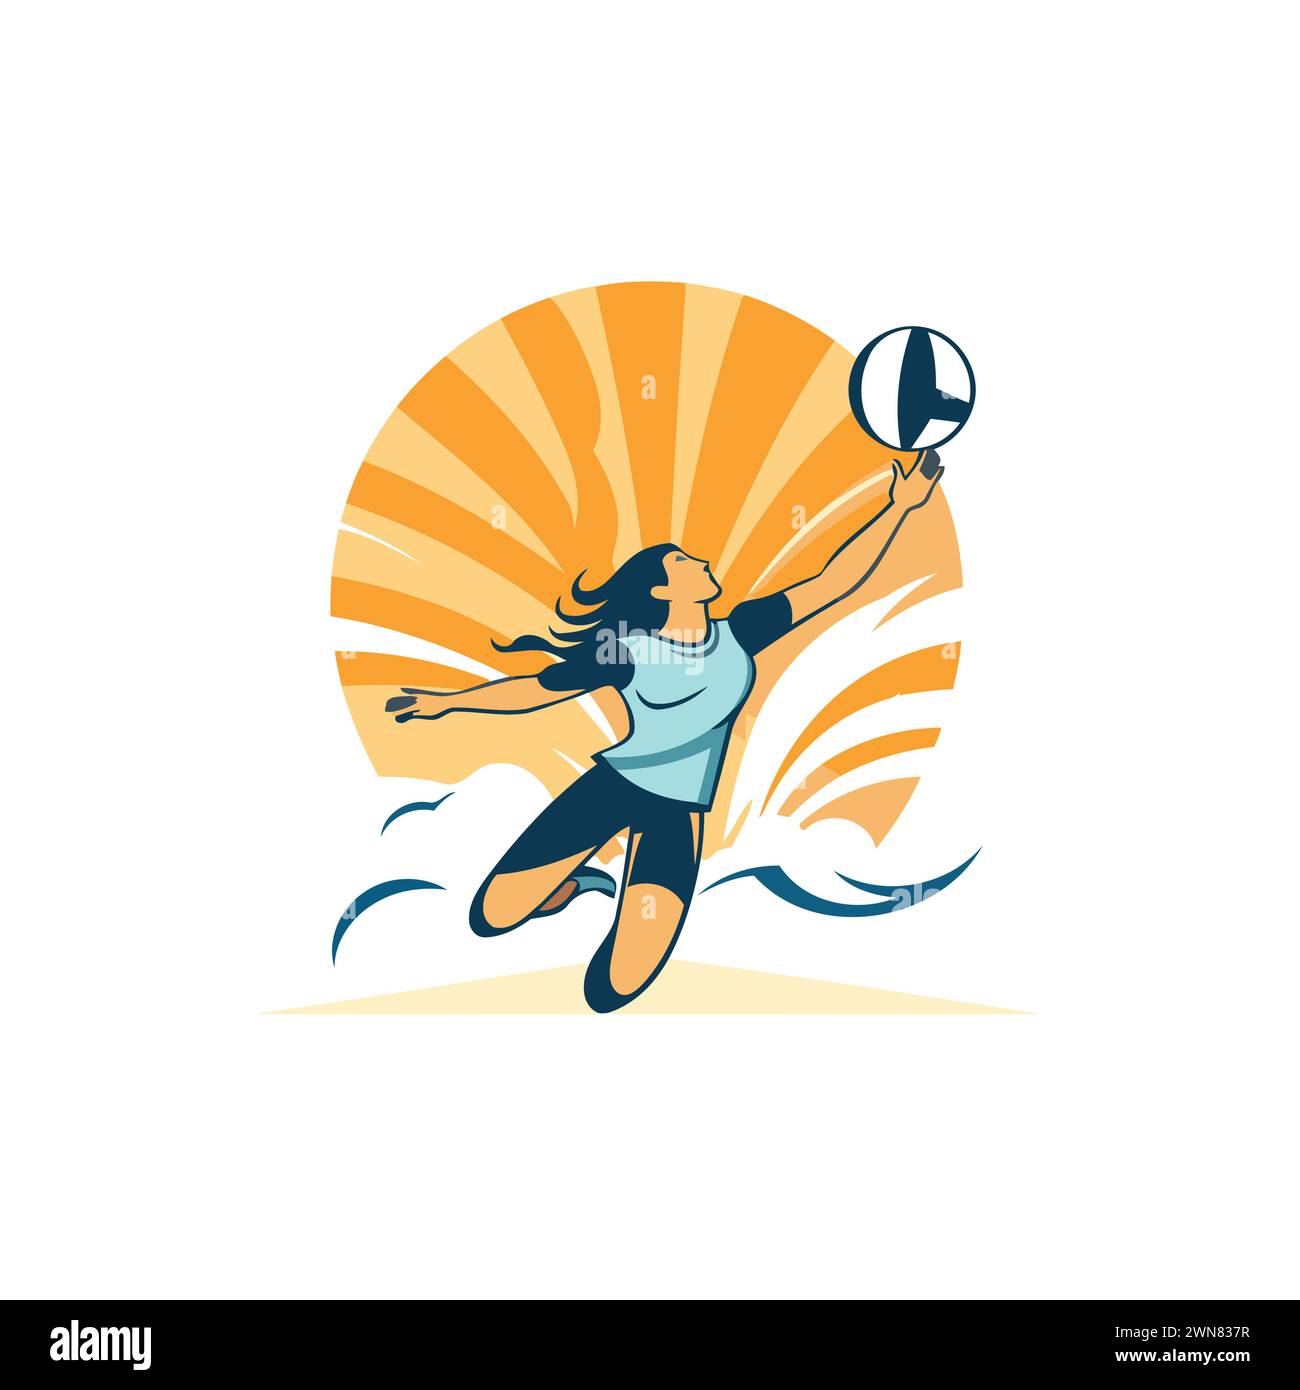 Volleyball player with ball in hand. Vector illustration on white background. Stock Vector